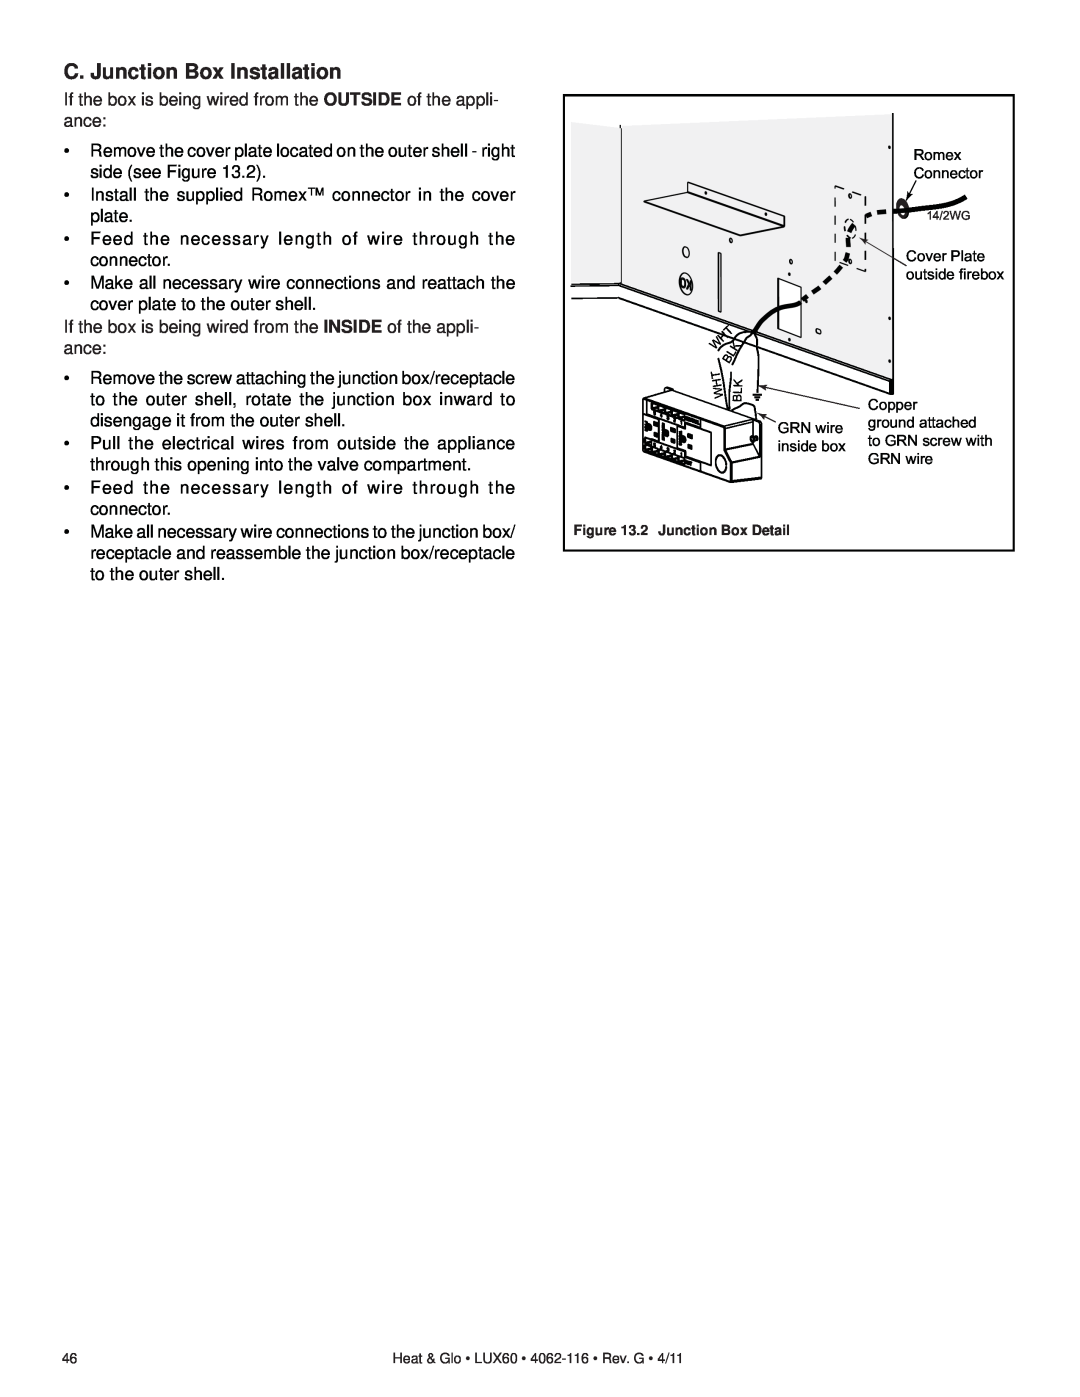 Heat & Glo LifeStyle LUX60 owner manual C. Junction Box Installation, 2 Junction Box Detail 